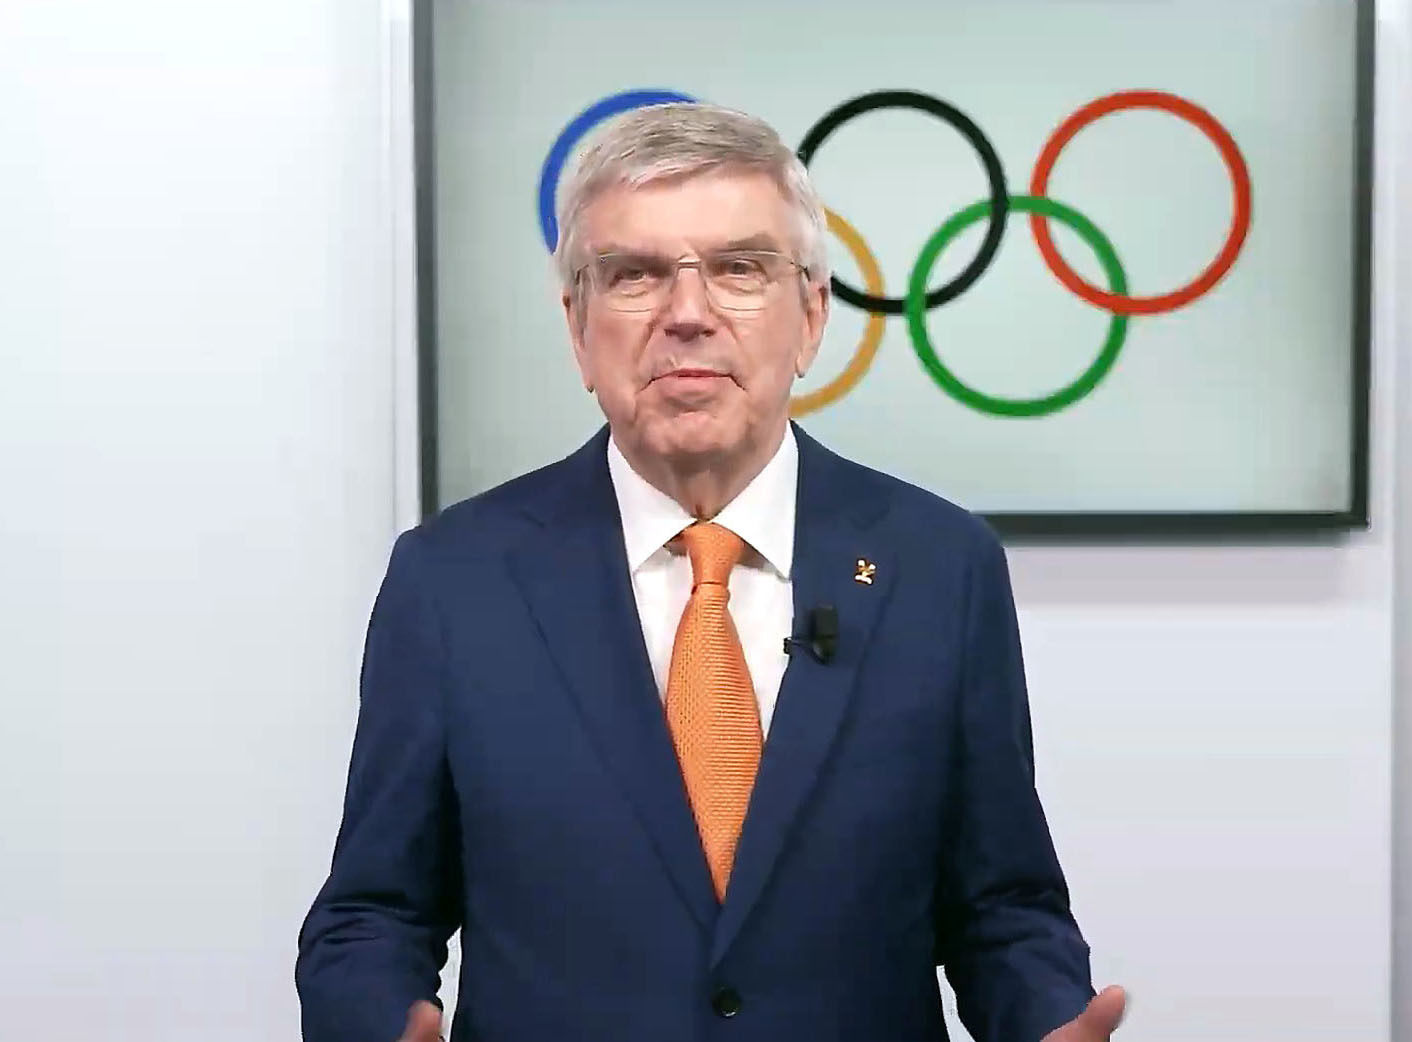 IOC president Thomas Bach says providing payments to athletes for Olympic success was the role of sponsors, governments or private institutions - not international sports federations. Photo: Kyodo